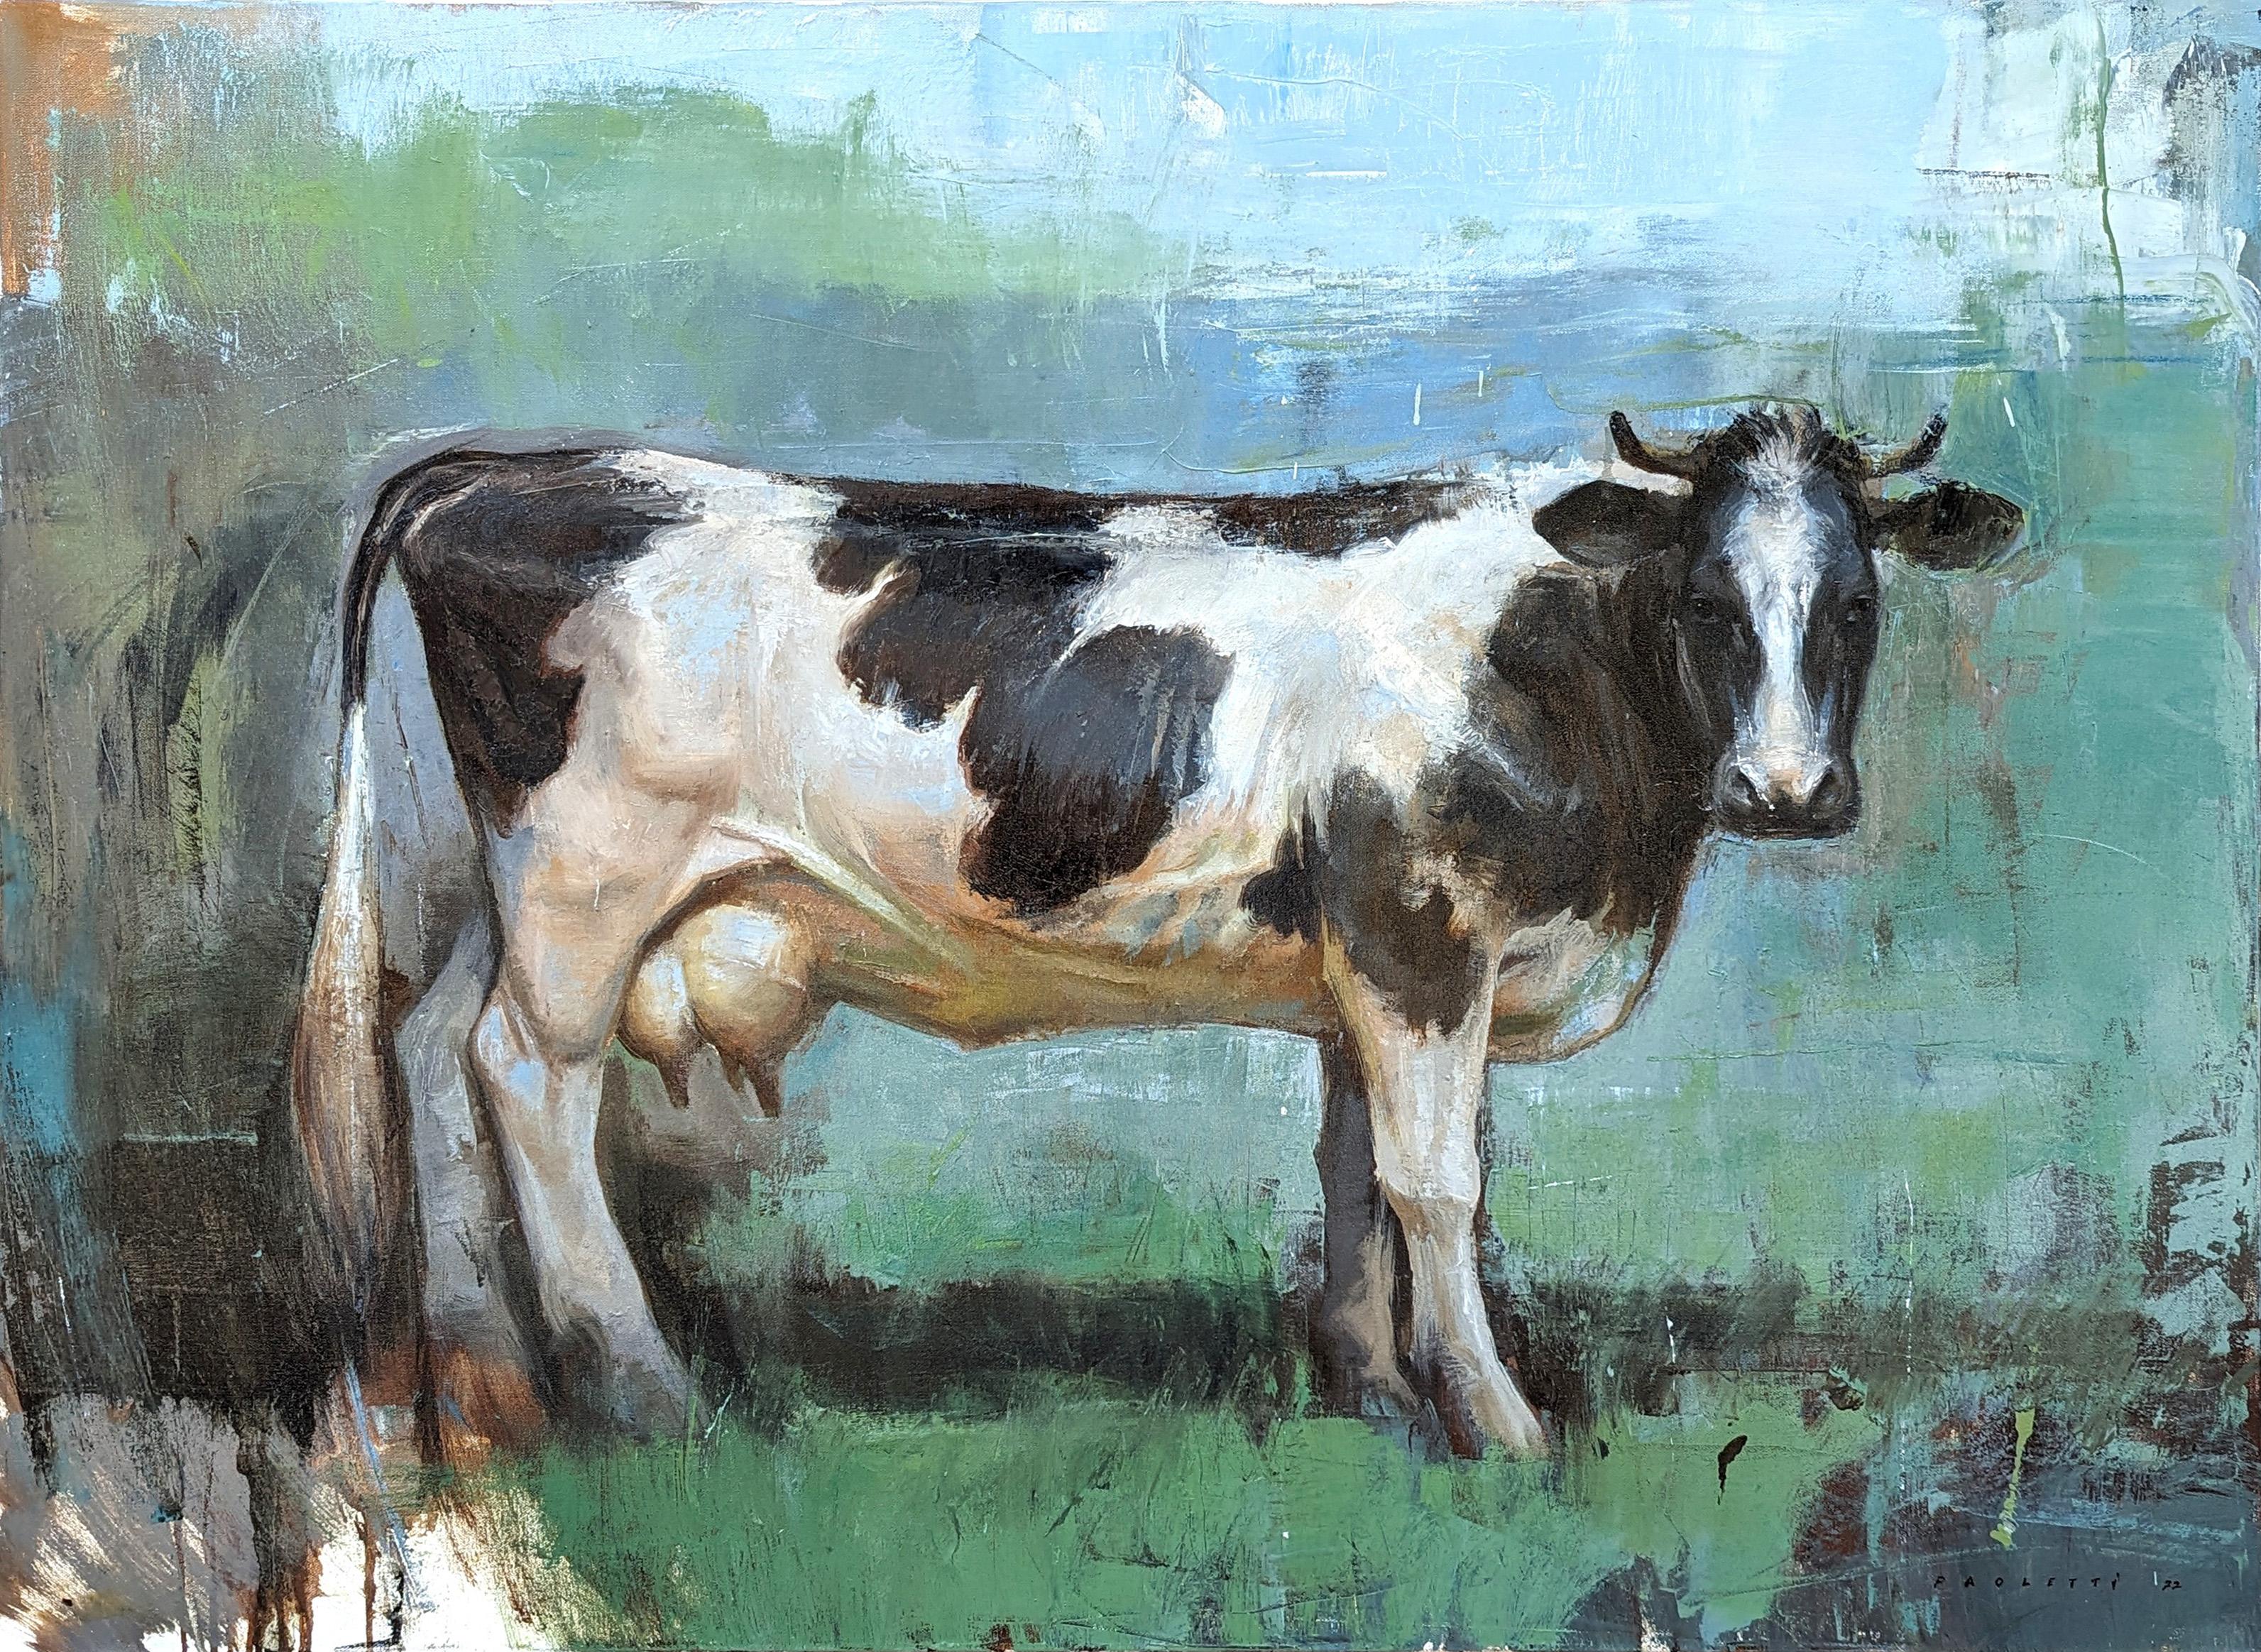 Matthew Paoletti Abstract Painting – "WI. Milchkuh" Contemporary Naturalistic Rural Animal Painting of a Cow